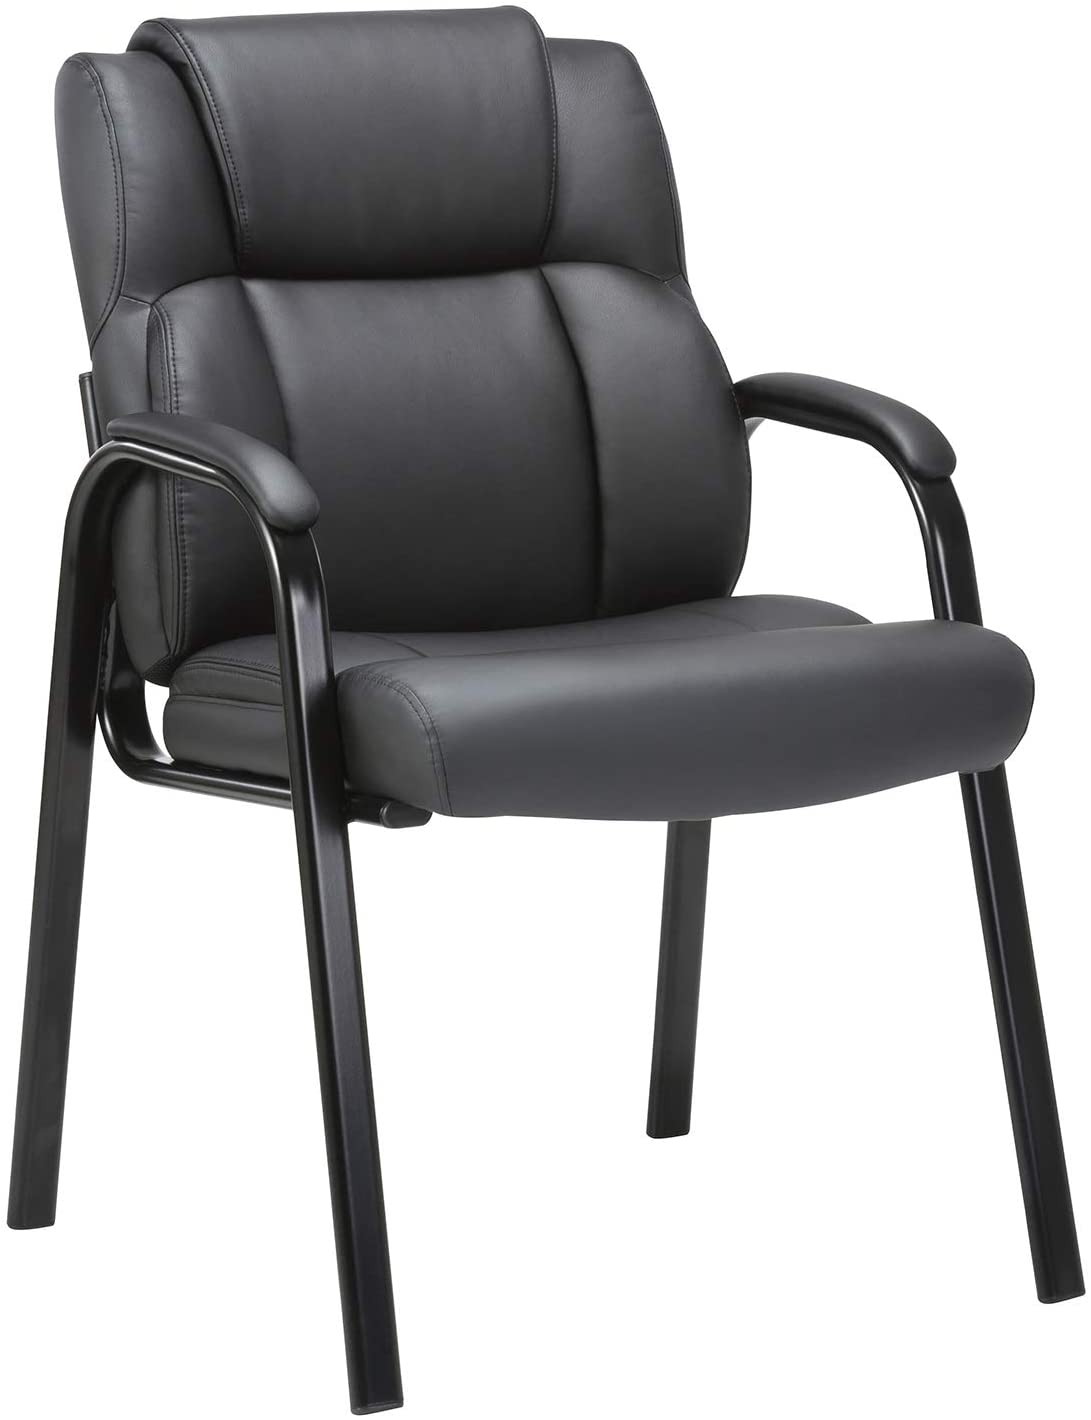 CLATINA Waiting Room Guest Chair with Padded Arm Rest Leather Guest Chair for Reception Meeting Conference Office Home Black, 1 pack - image 1 of 8